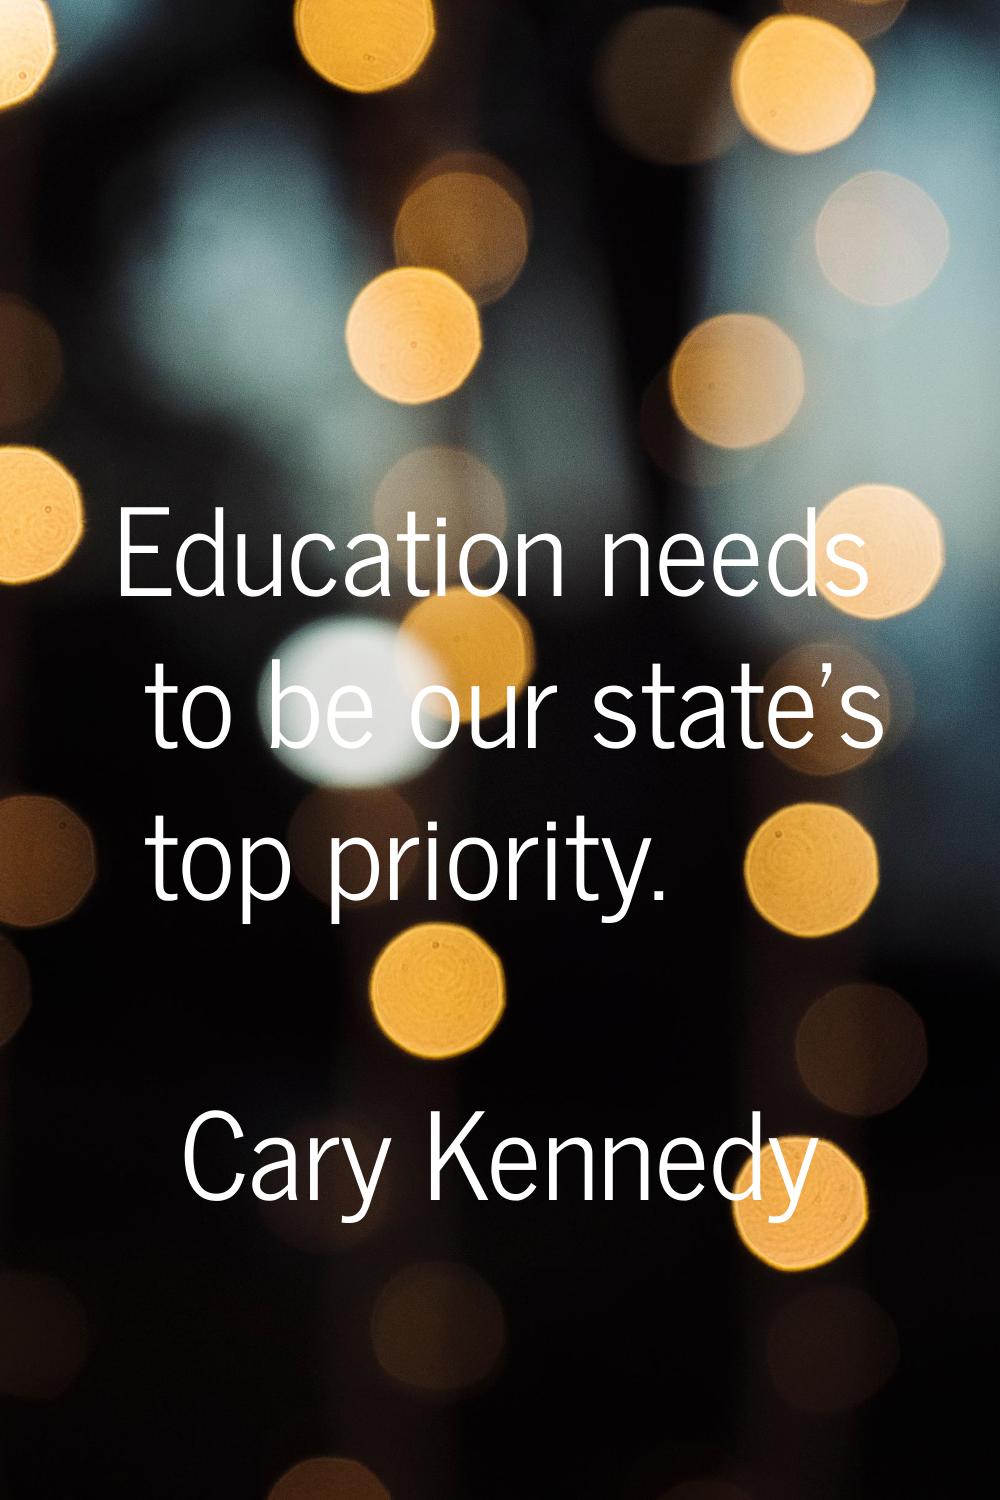 Education needs to be our state's top priority.